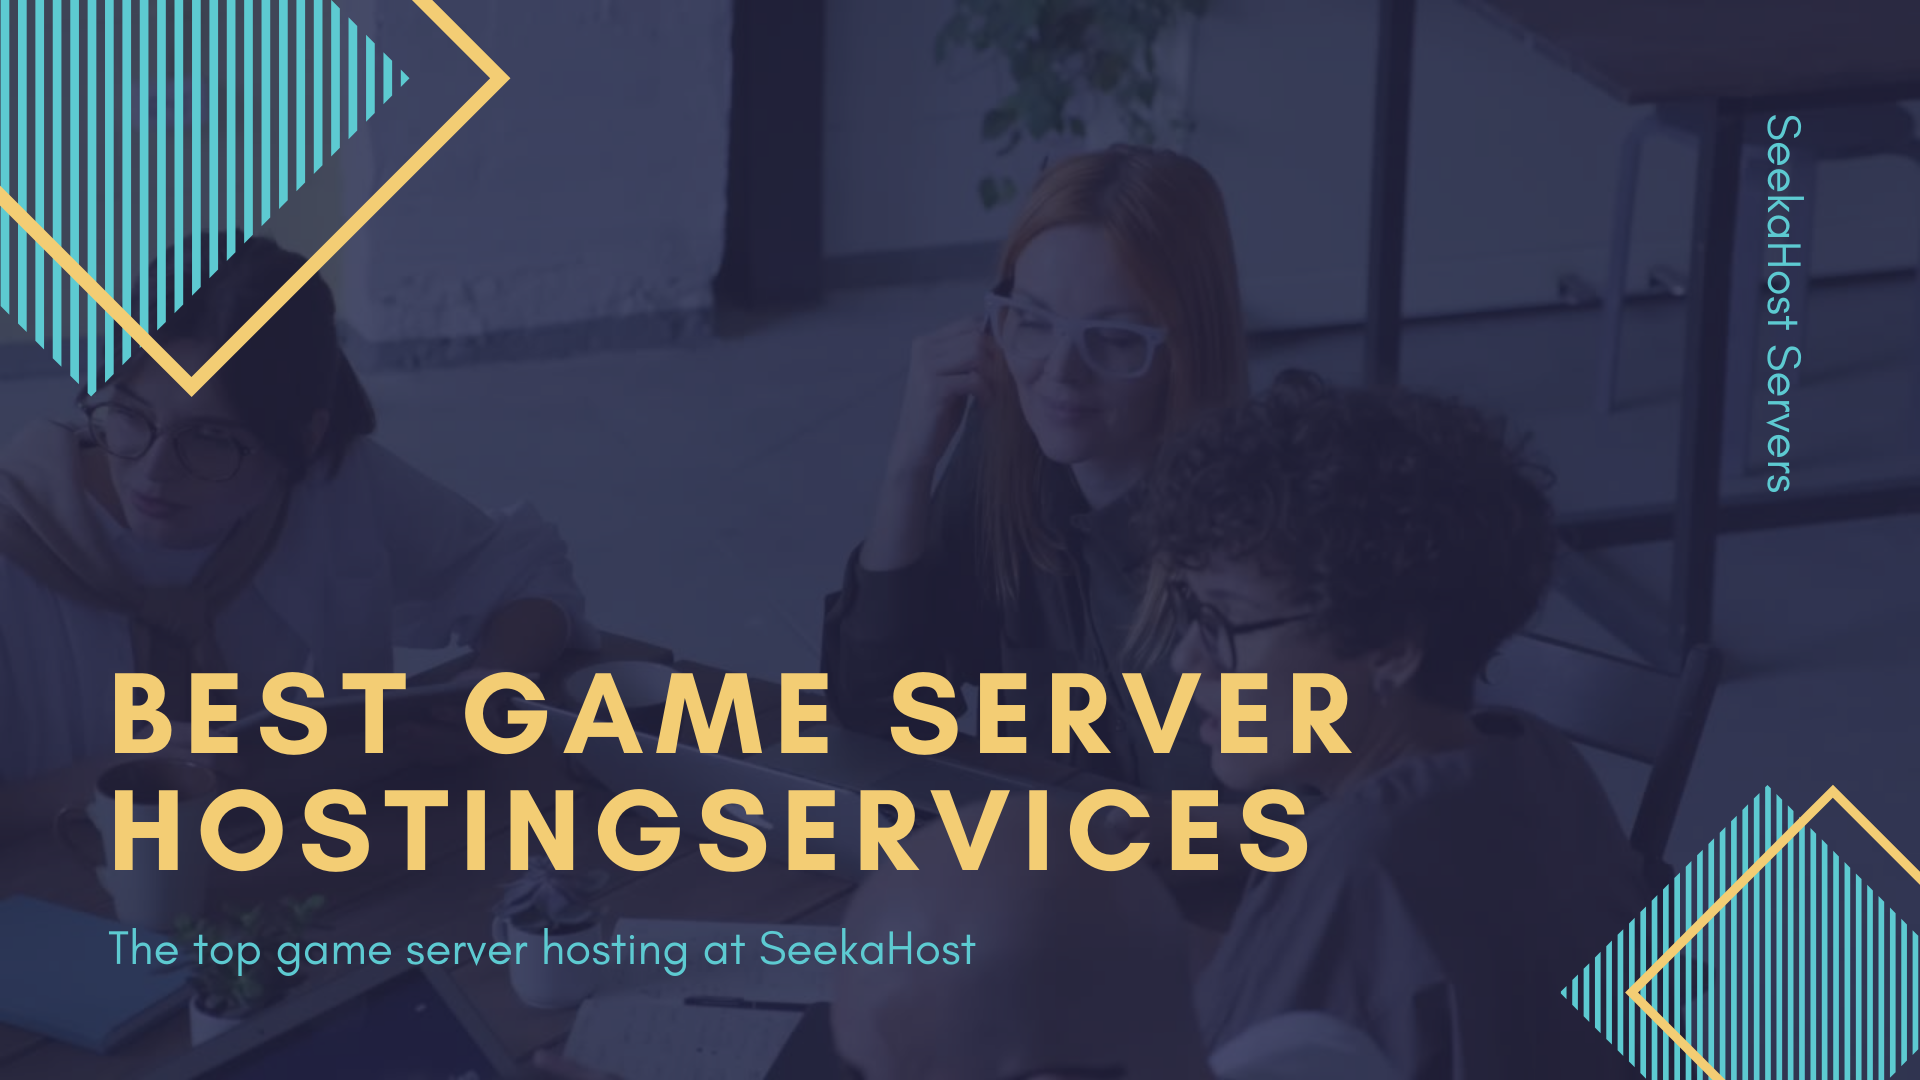 25 Server Hosting Services (Best) for Gaming from SeekaHost | Fernando Raymond